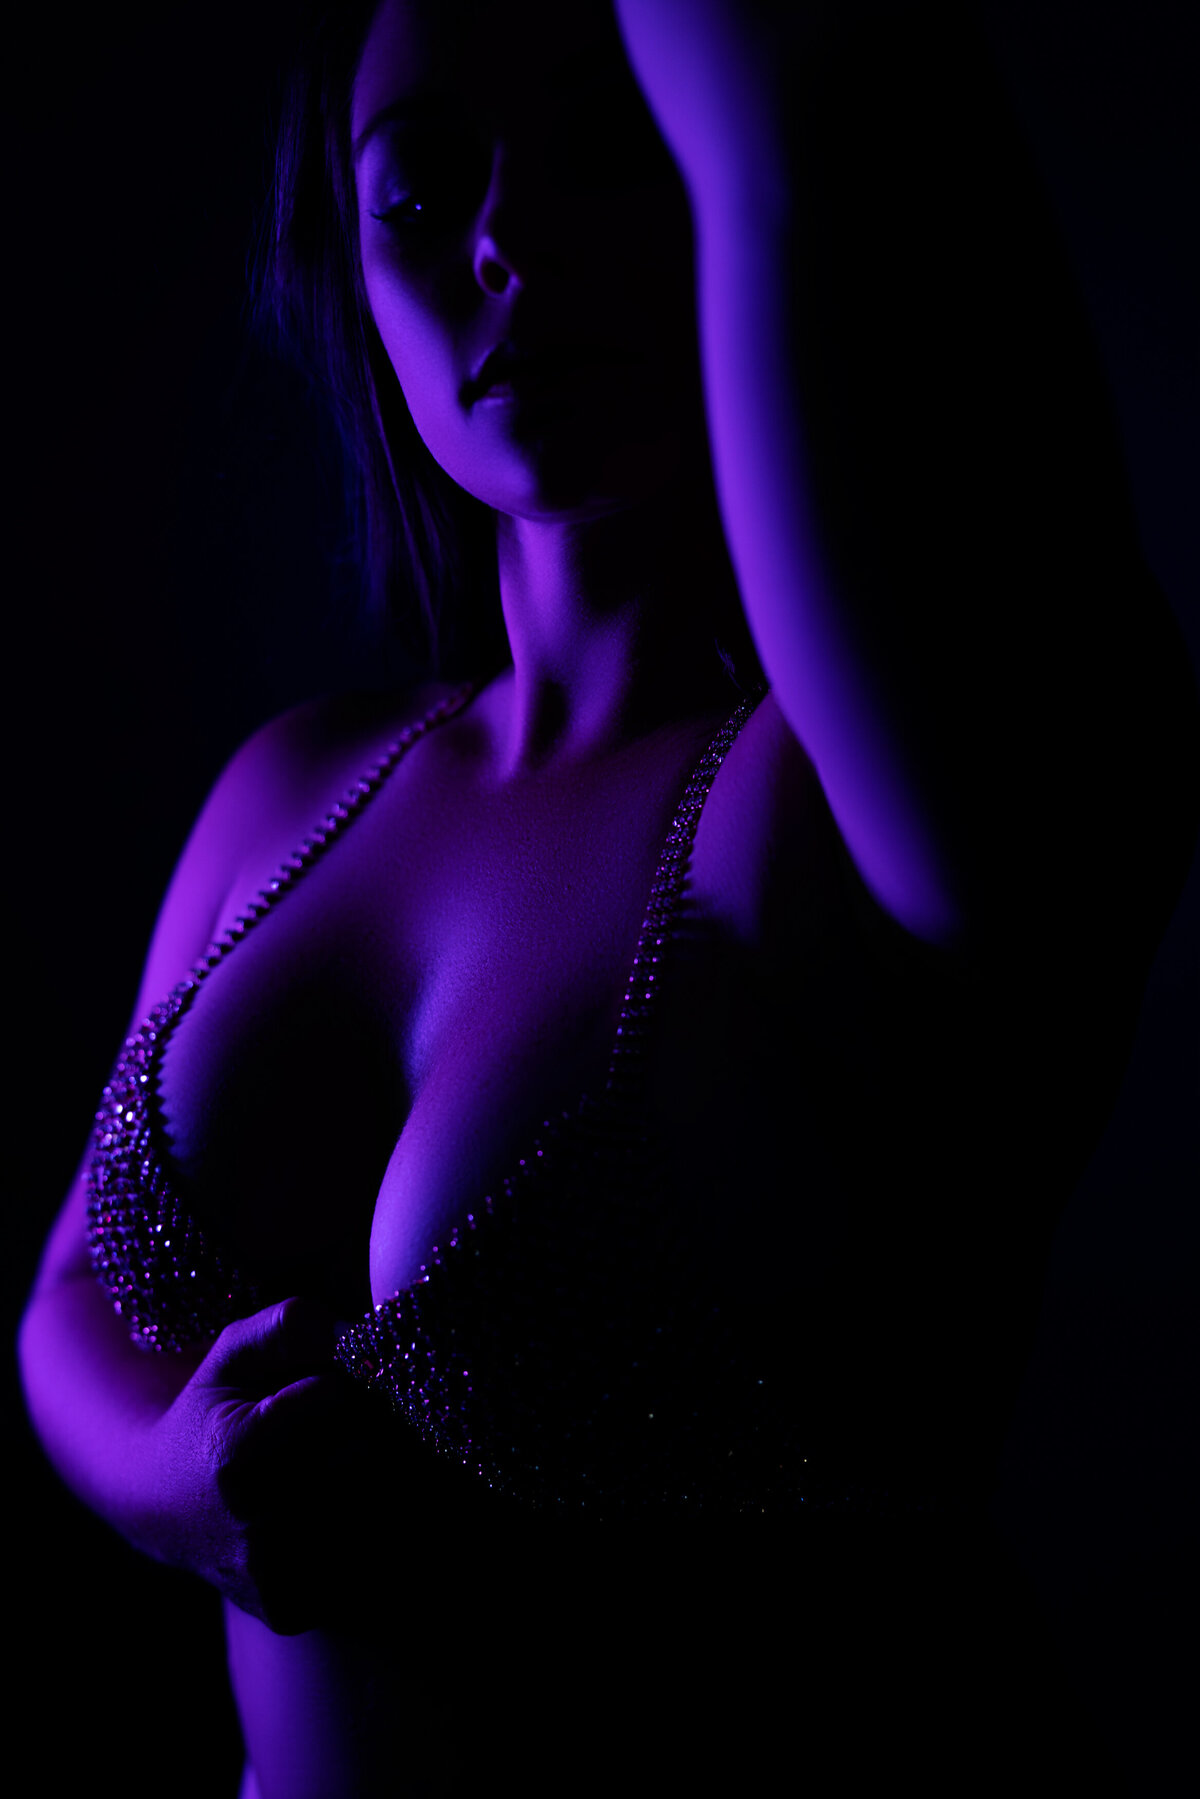 black and purple silhouette of womans face and chest